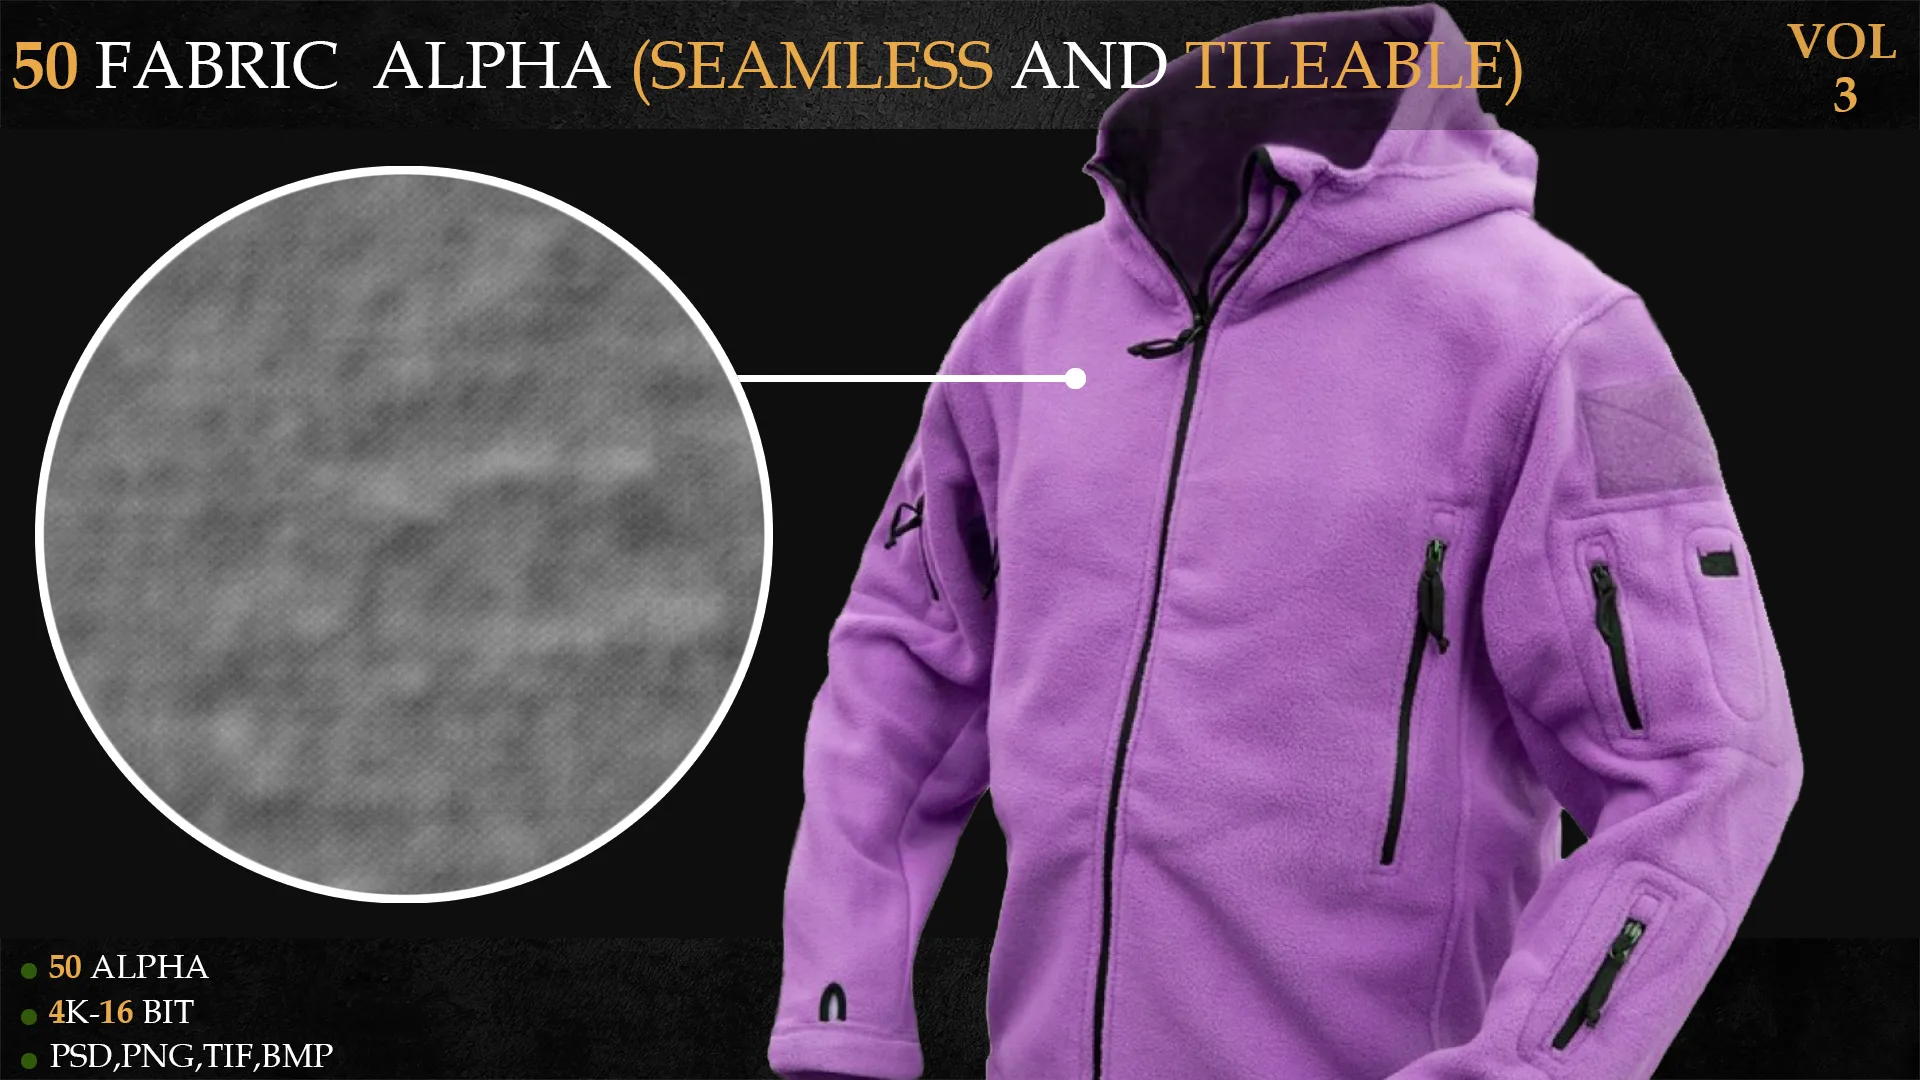 50 FABRIC ALPHA (SEAMLESS AND TILEABLE)-VOL 3